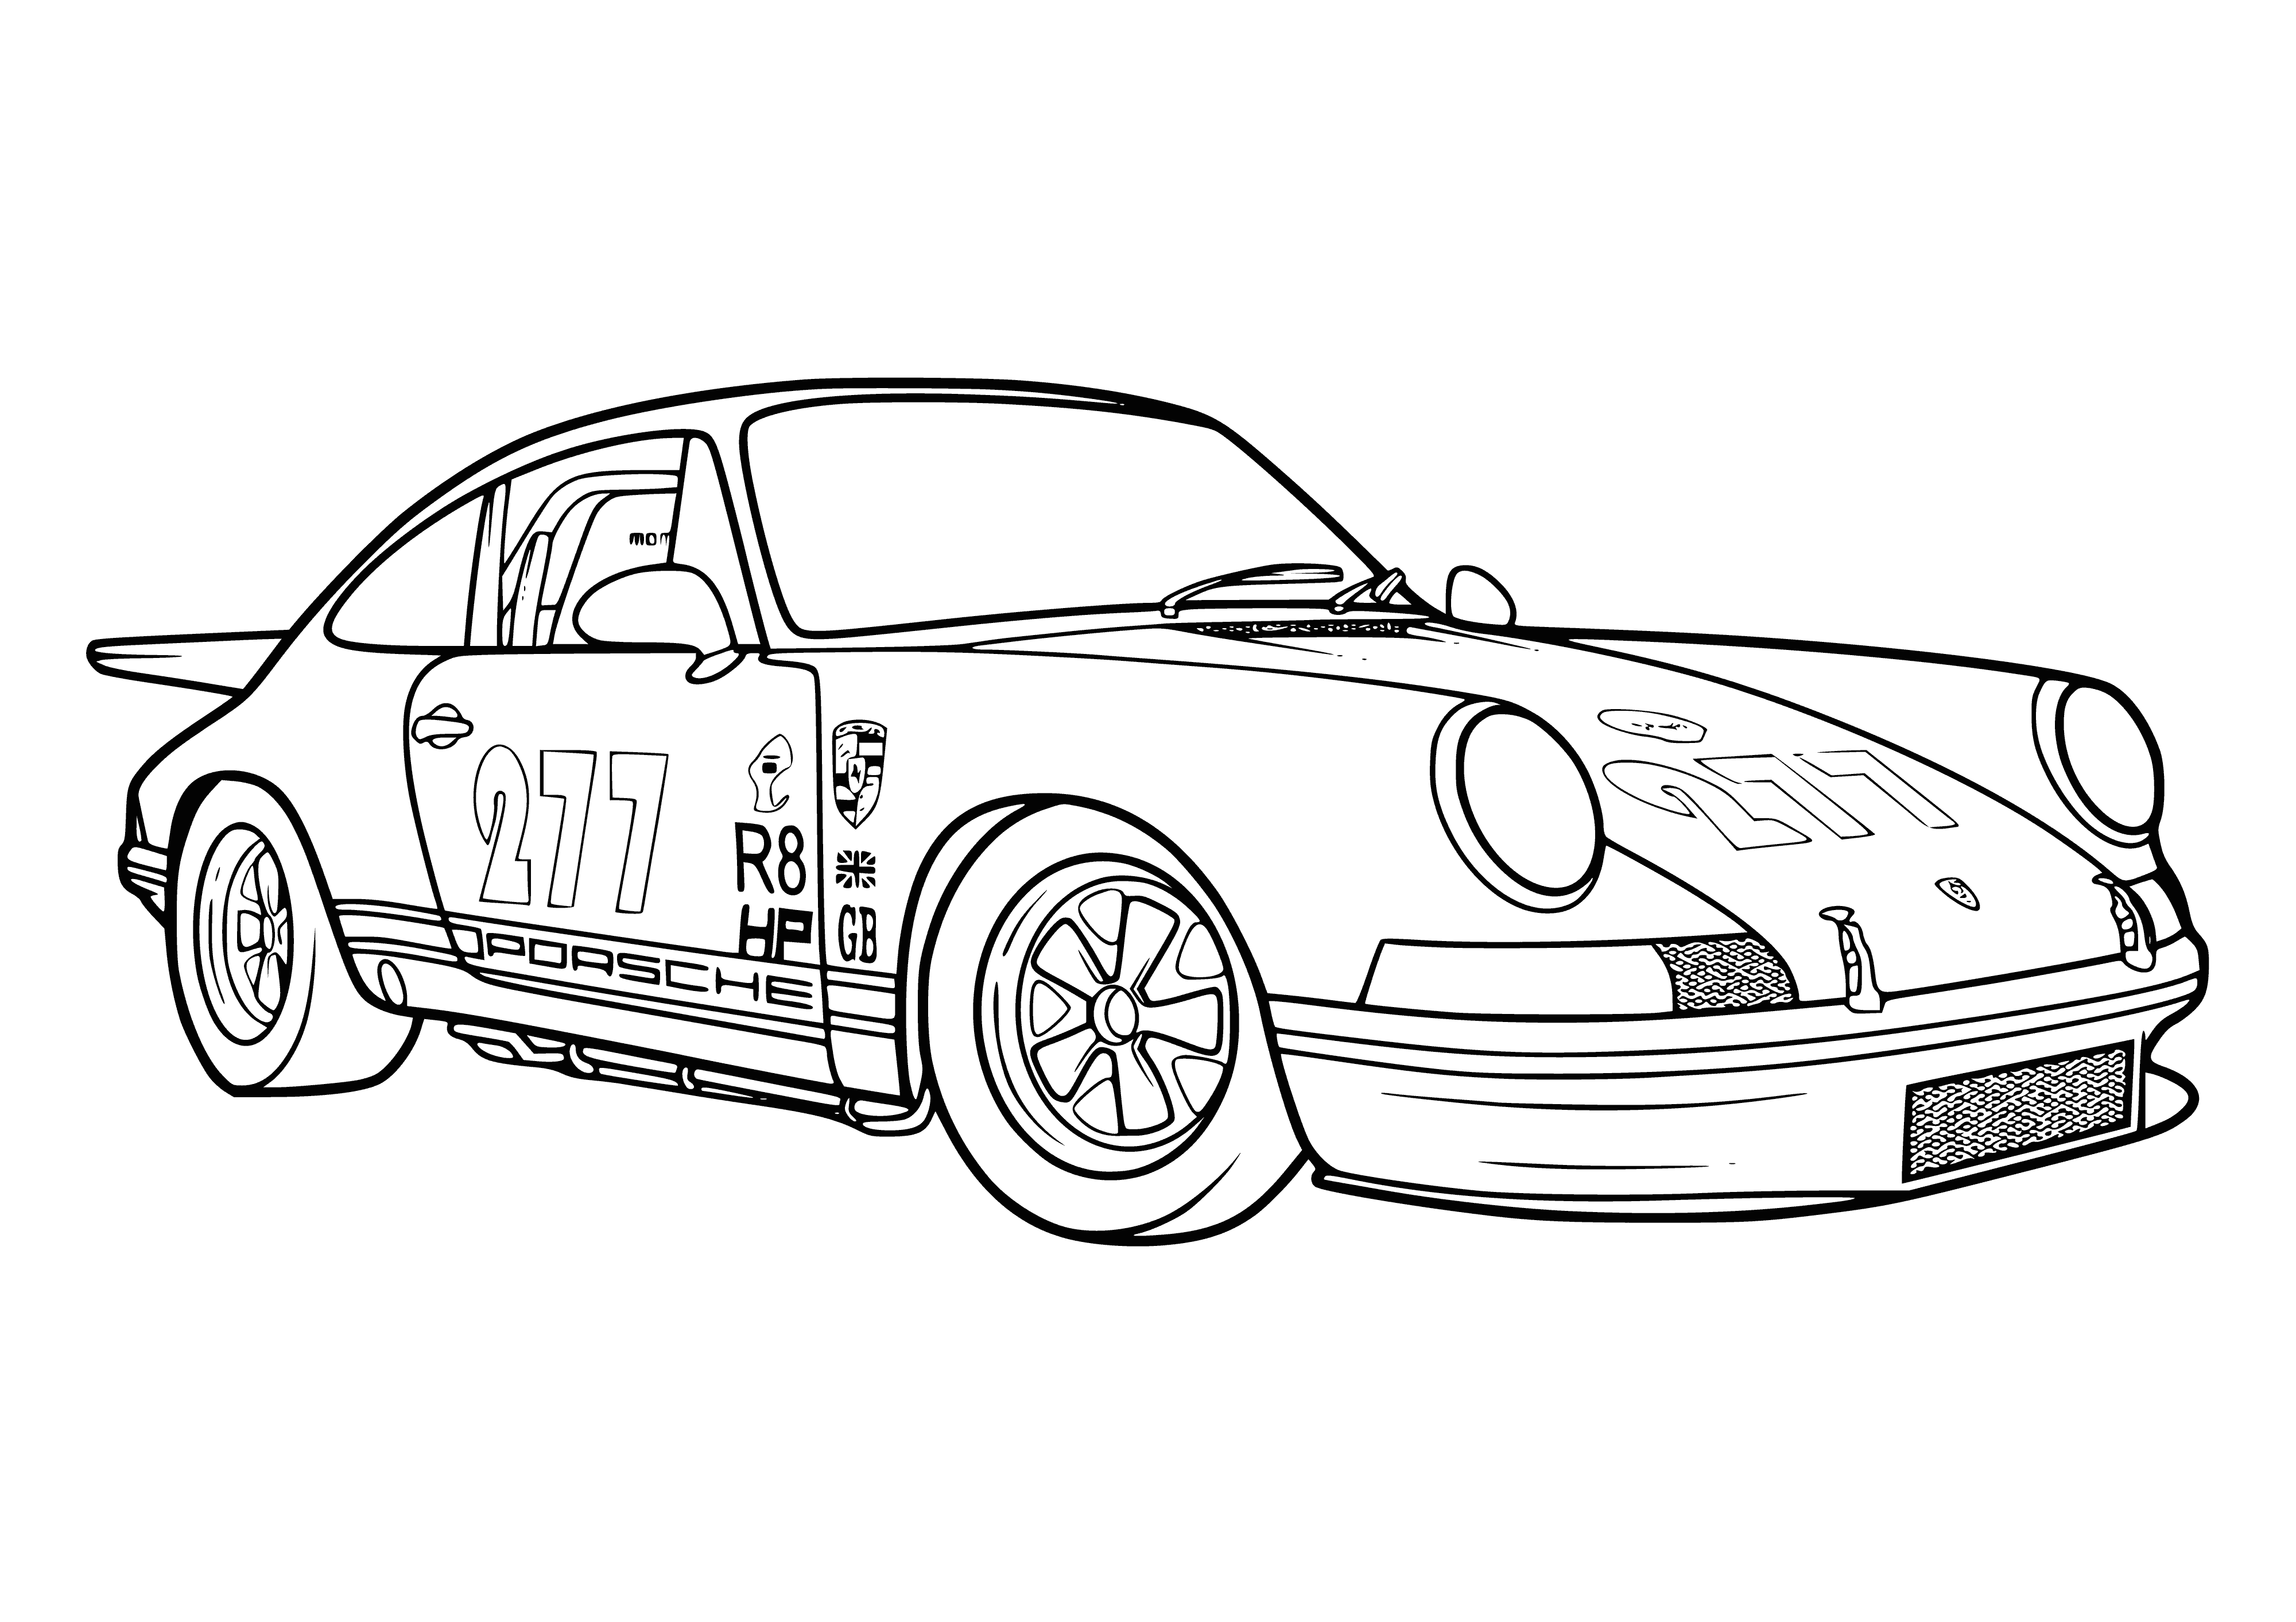 coloring page: Porsche car has a unique, aircraft-inspired design; wide stance, low-profile tires, long hood & carbon spoiler give it aerodynamic agility & excellent handling.